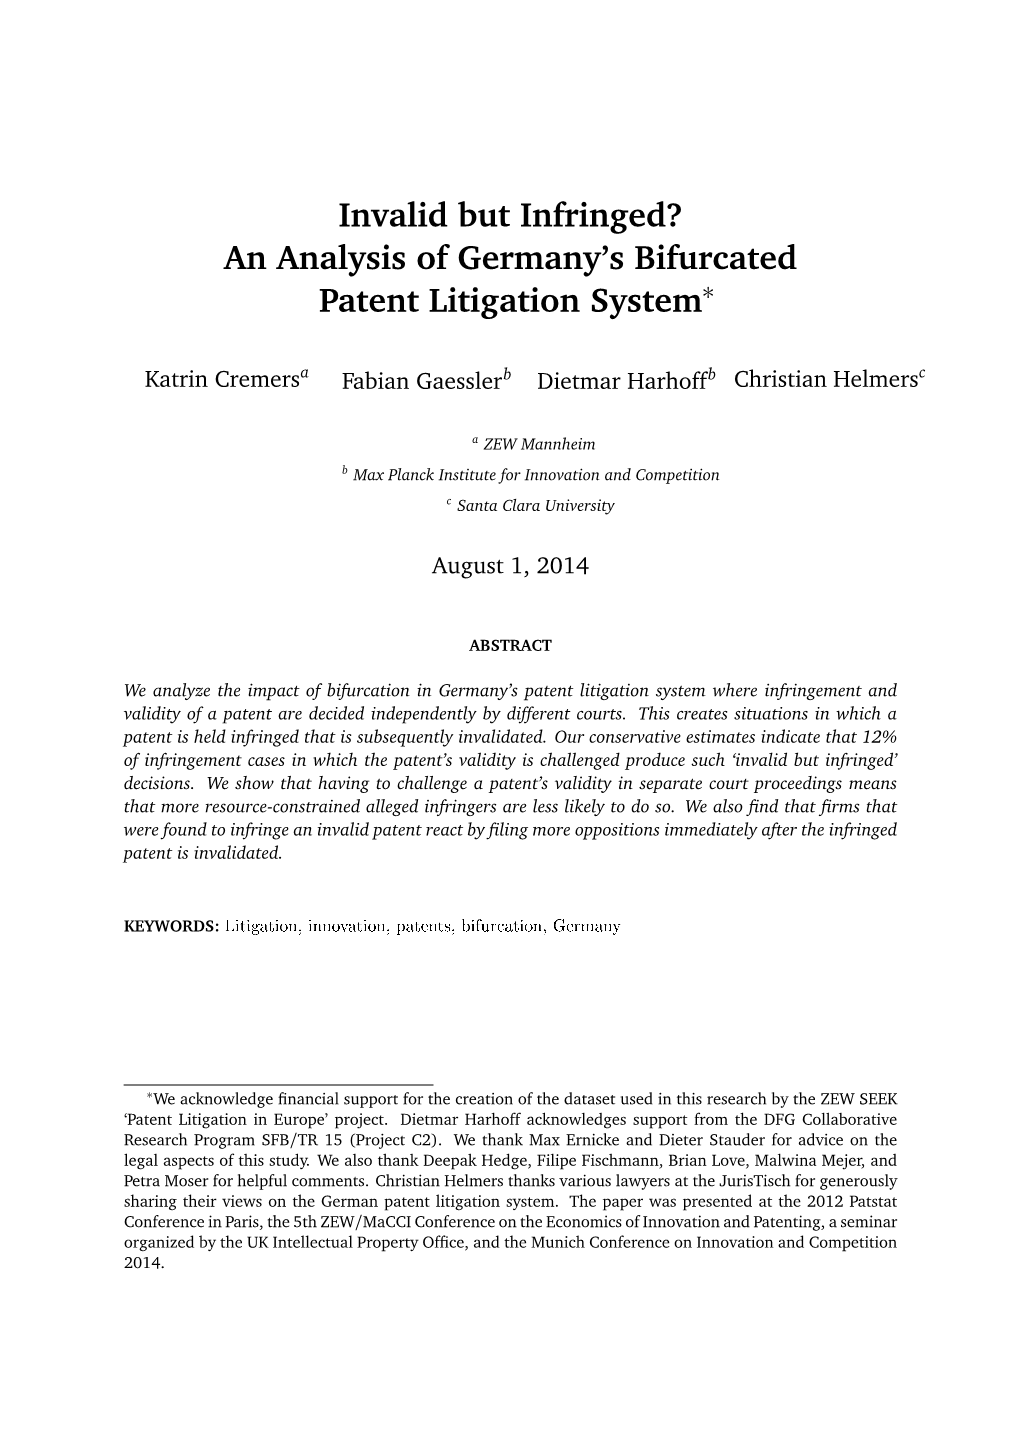 An Analysis of Germany's Bifurcated Patent Litigation System